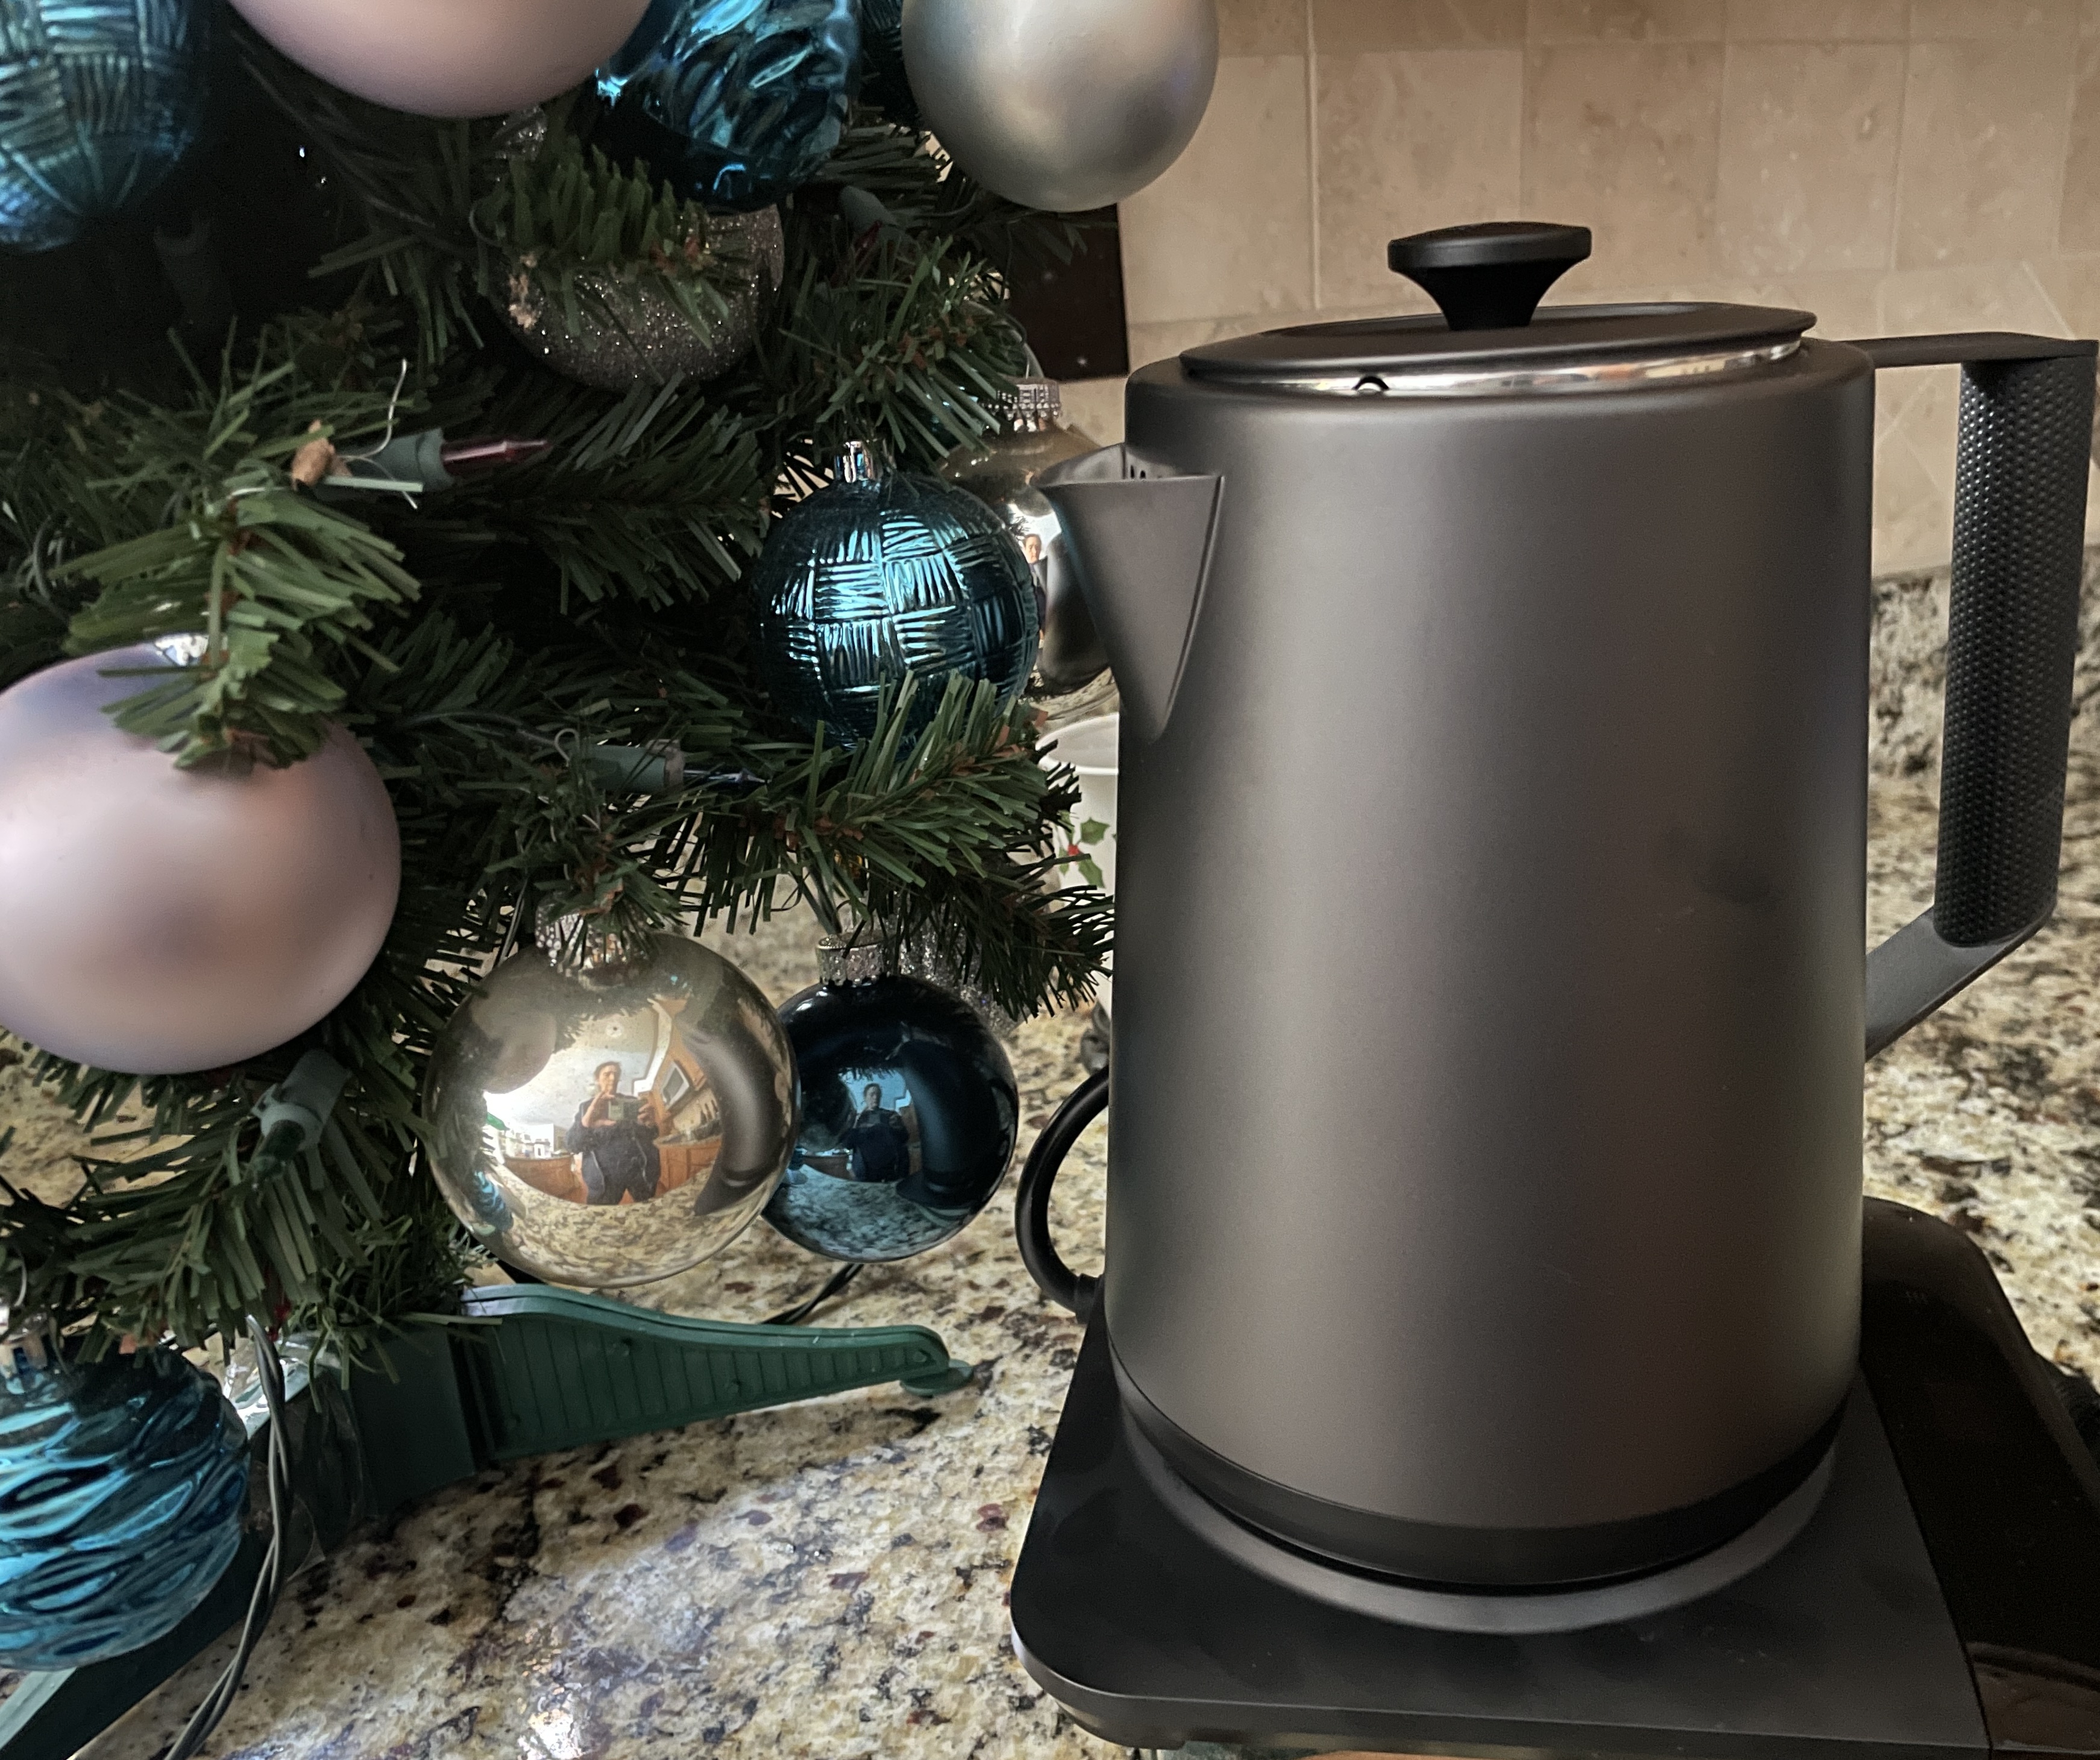 https://wehco.media.clients.ellingtoncms.com/imports/adg/photos/103020796_Saki-s-new-electric-kettle-will-boil-your-water-in-seconds-for-that-all-important-first-cup-of-coffee..jpg